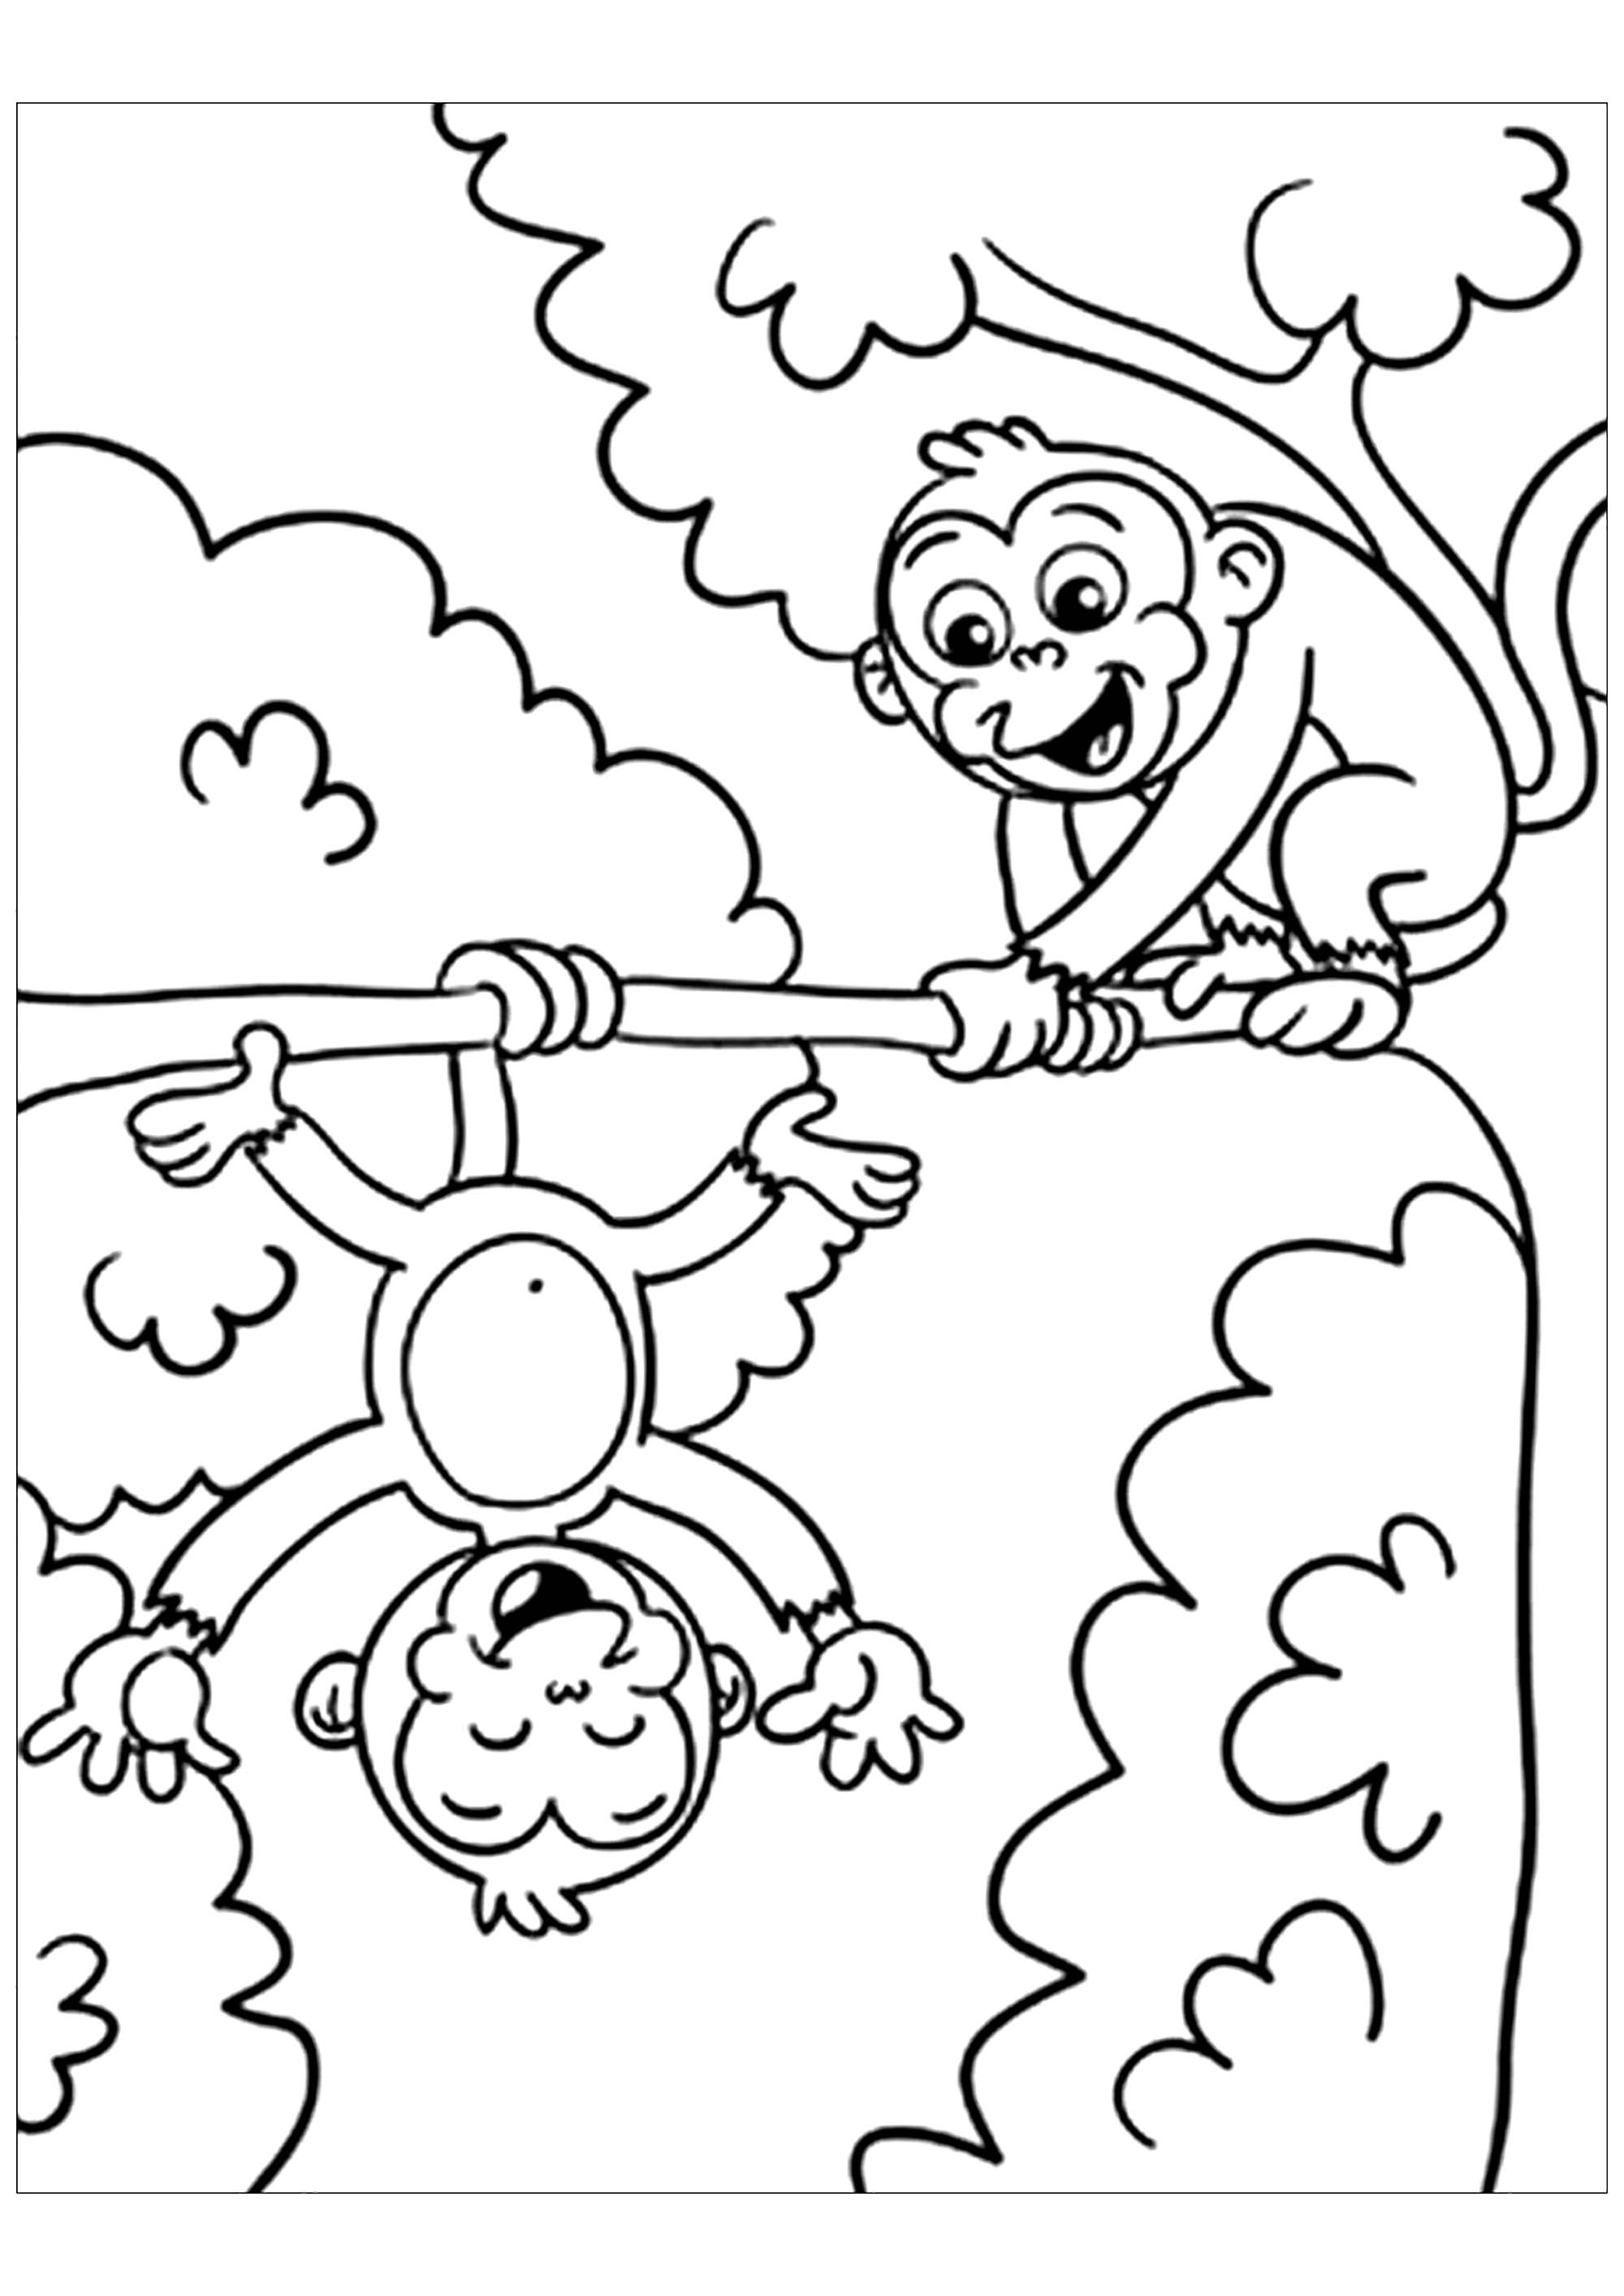 Free monkey drawing to print and color - Monkeys Kids Coloring Pages